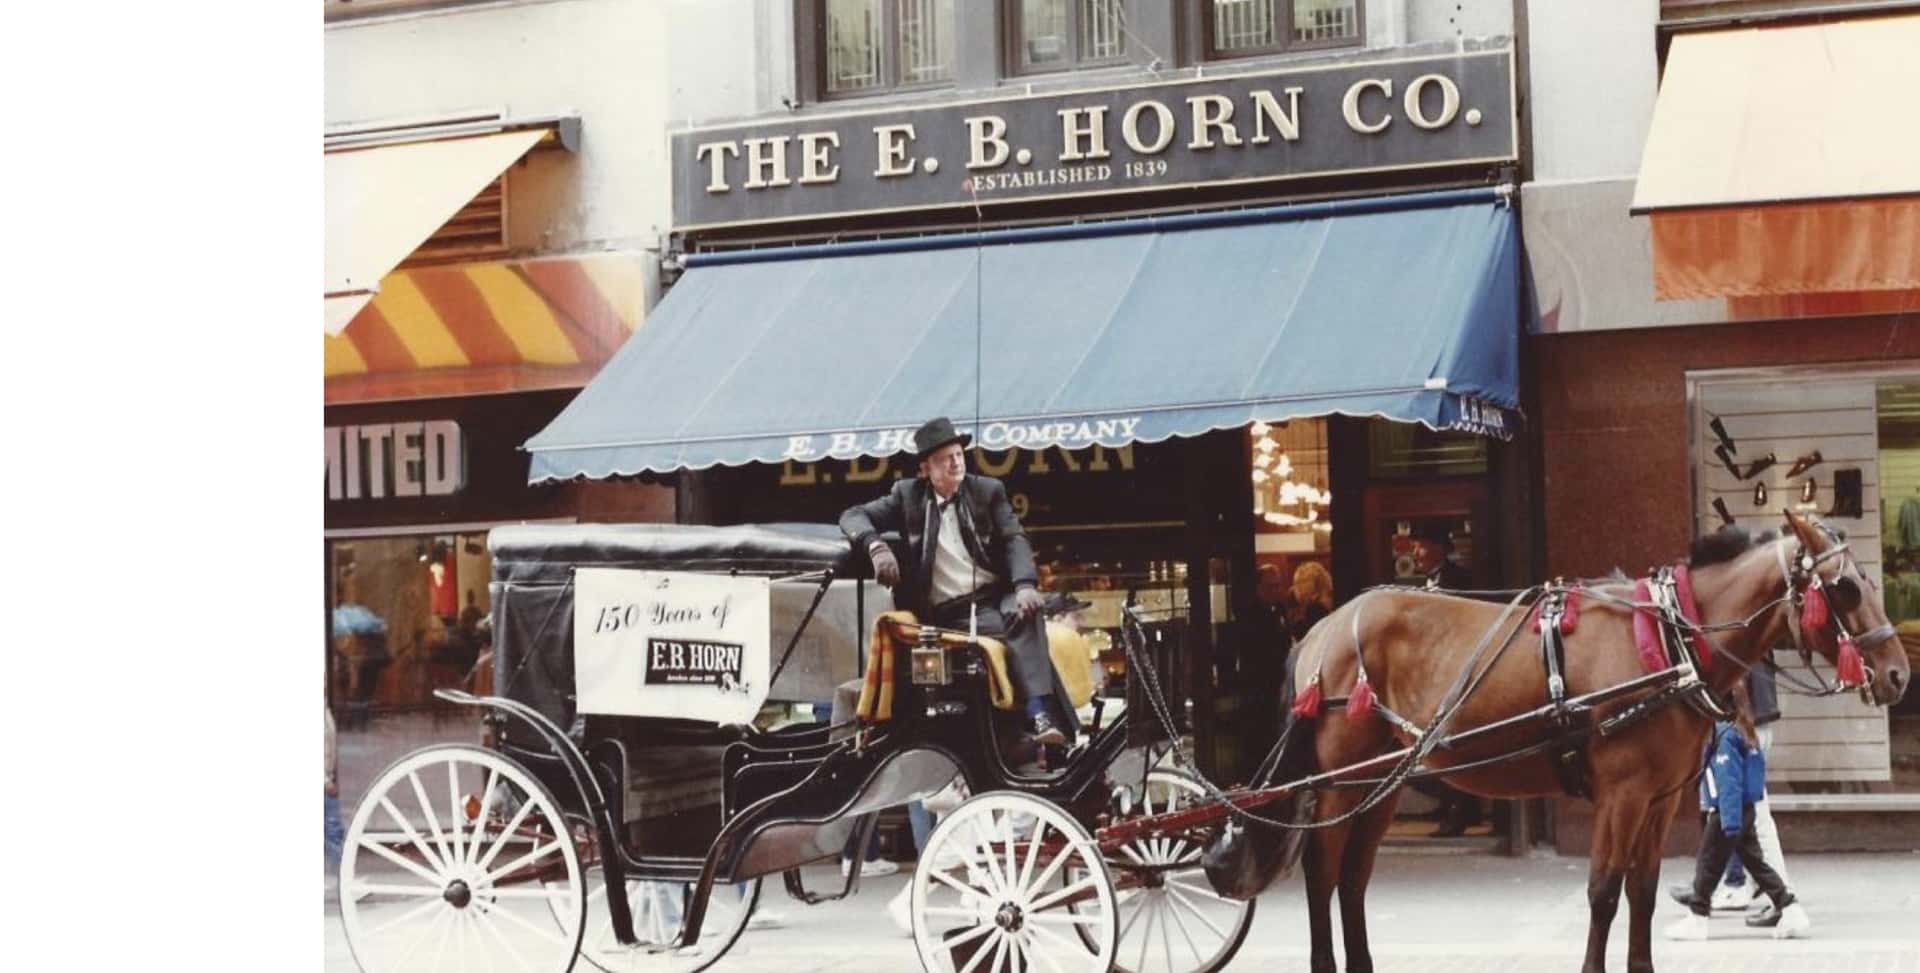 Horse and carriage in front of a historic EB Horn bridal jewelry shop in Boston.